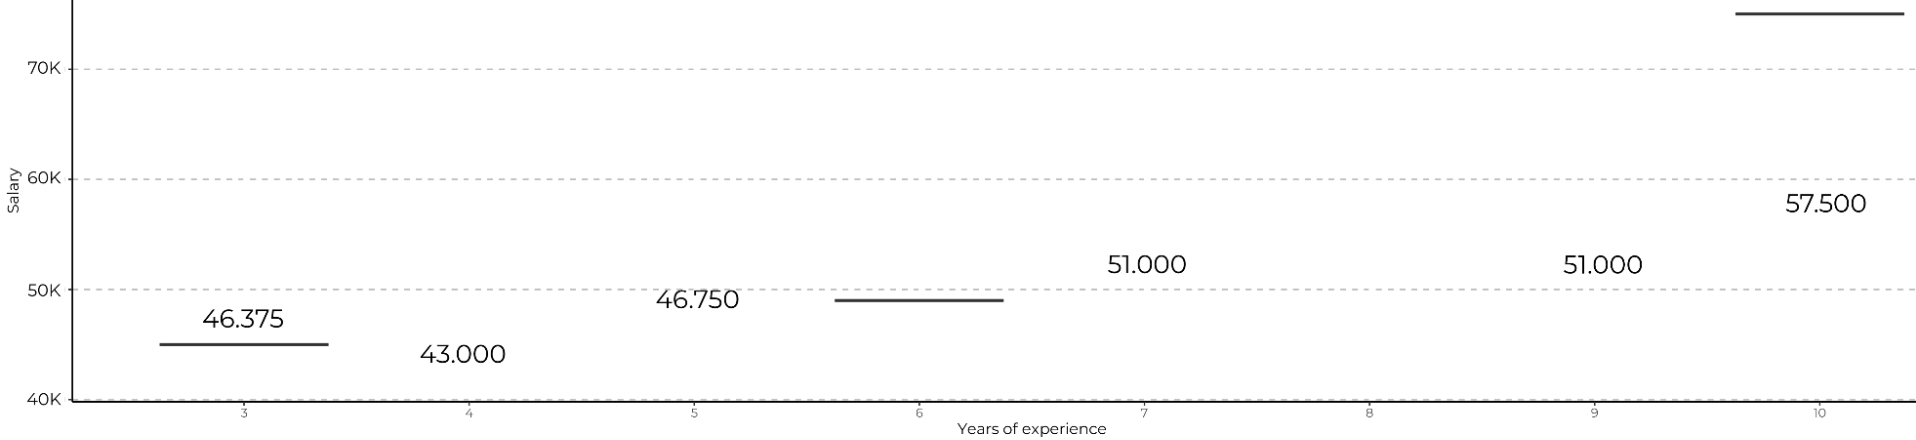 Graph showing salary ranges by years of experience for Visual designers.